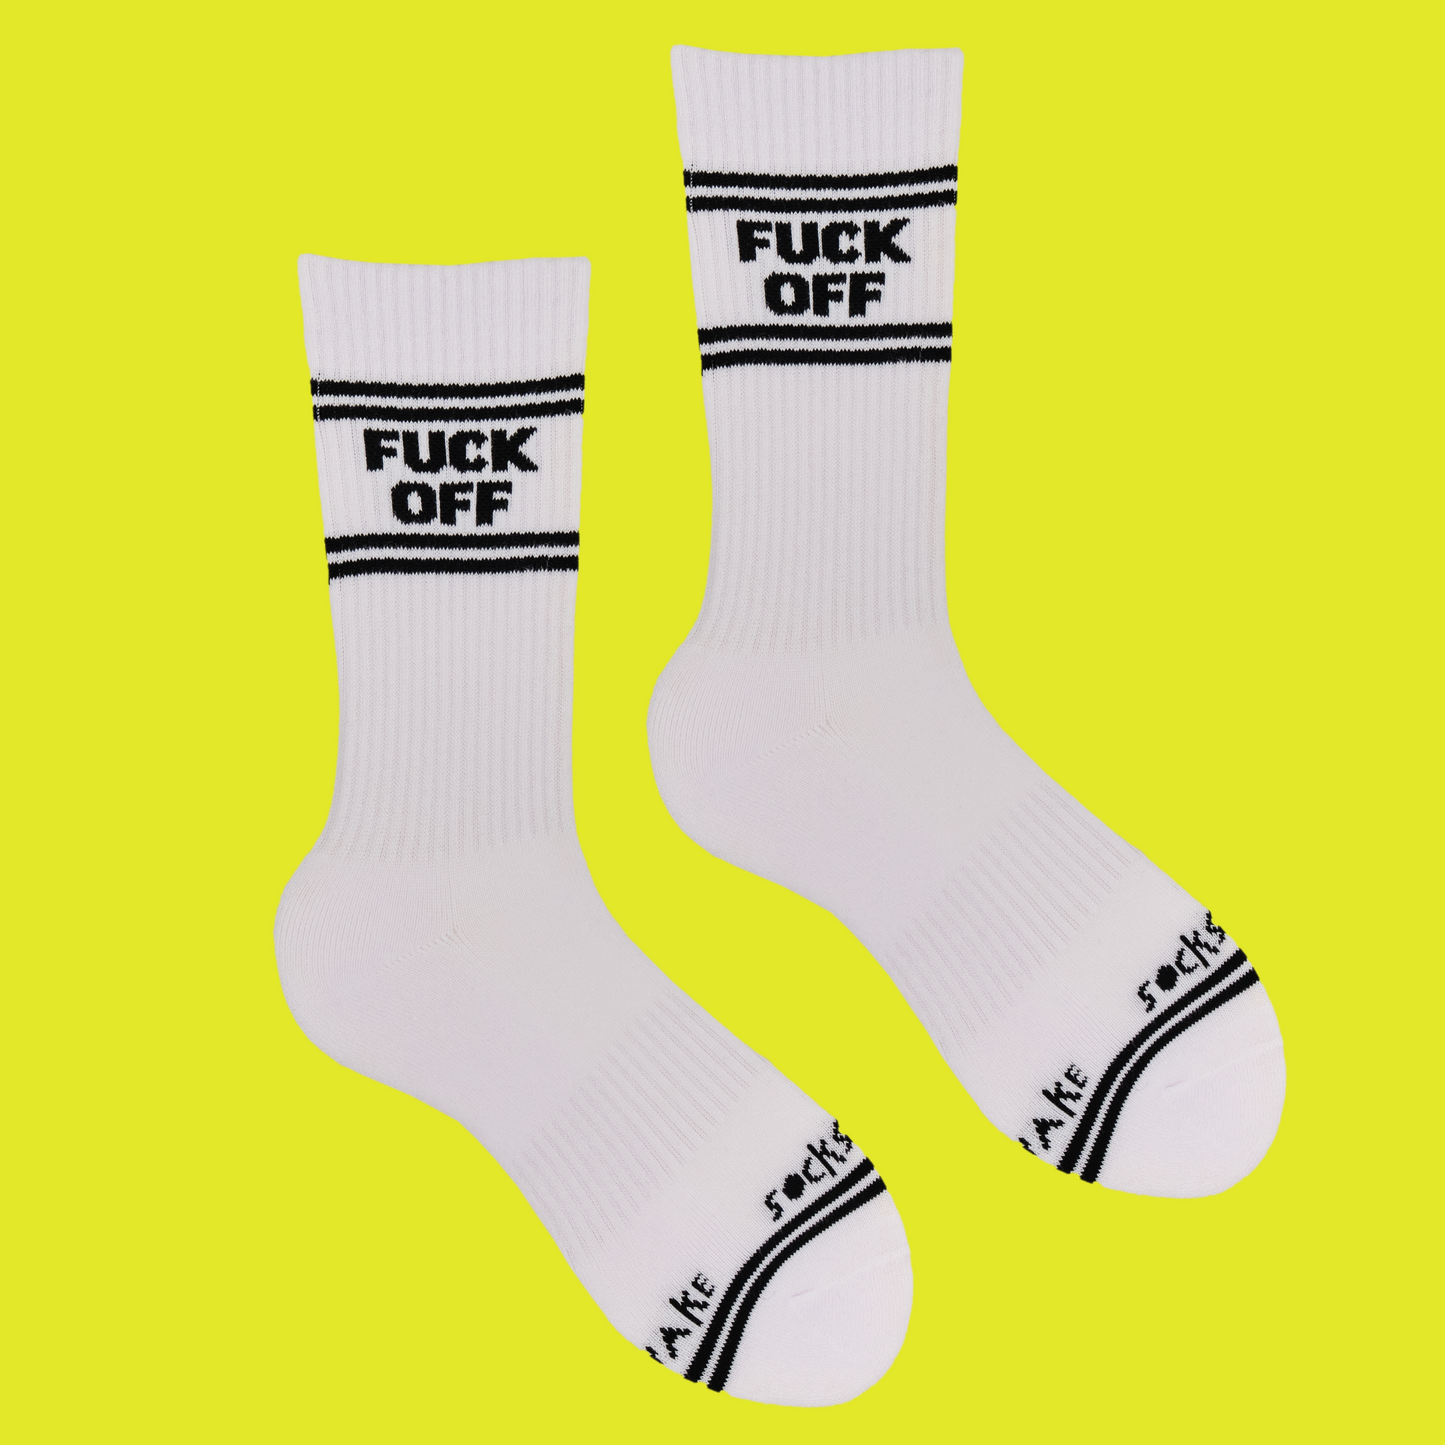 A white pair of athletic socks with black trim on the ankles and toes. And some very rude words that mean get lost on the ankle.